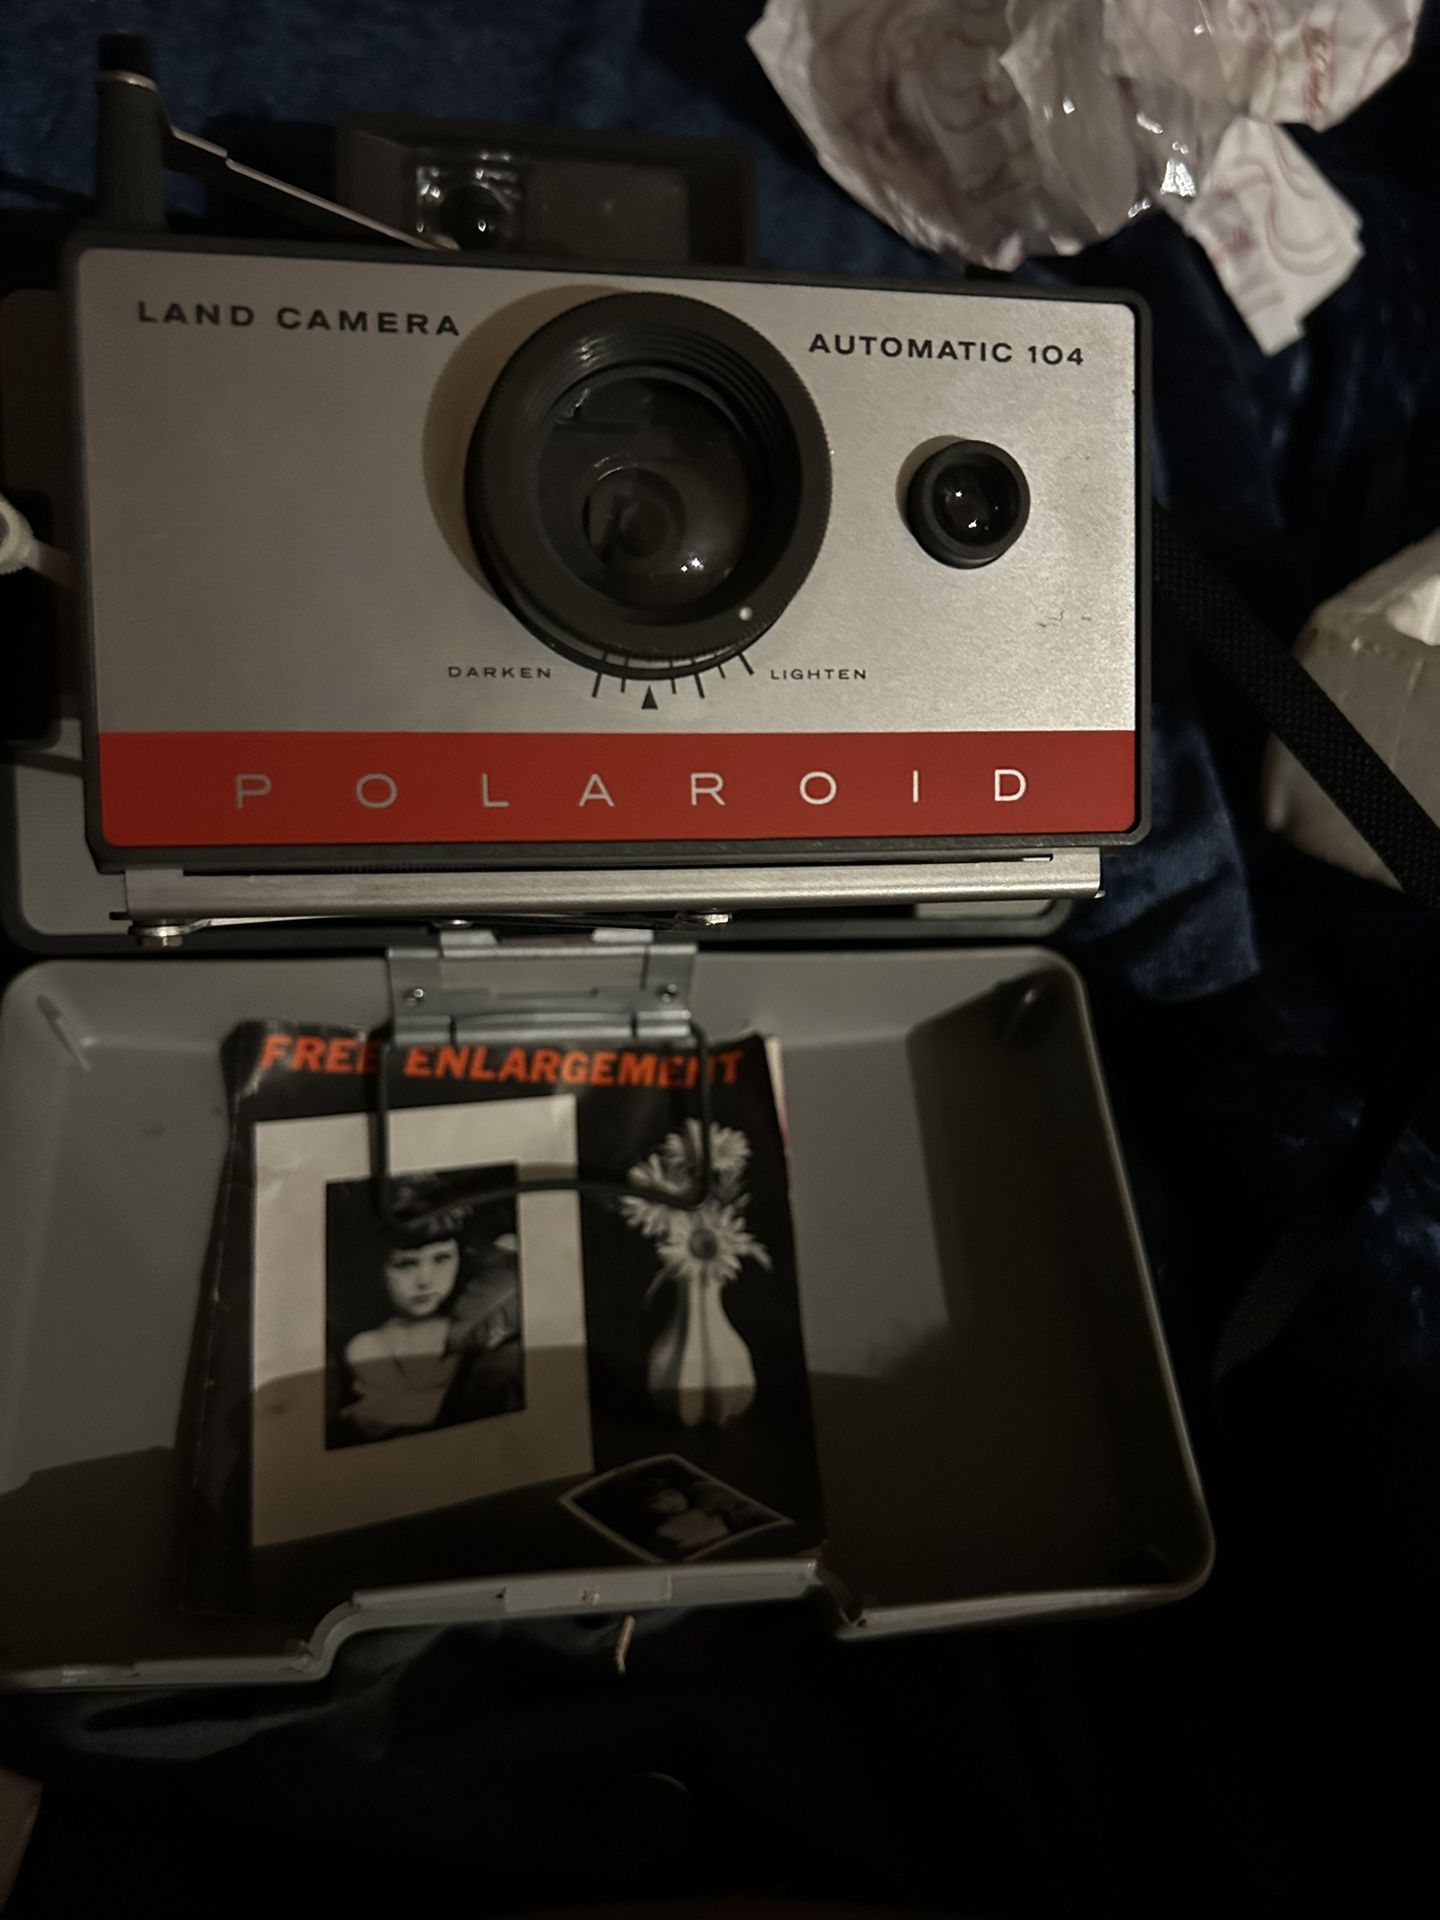 1970 SX70 Polaroid “One step” Land Camera. Also, automatic 104 Polaroid Land Cam With Case